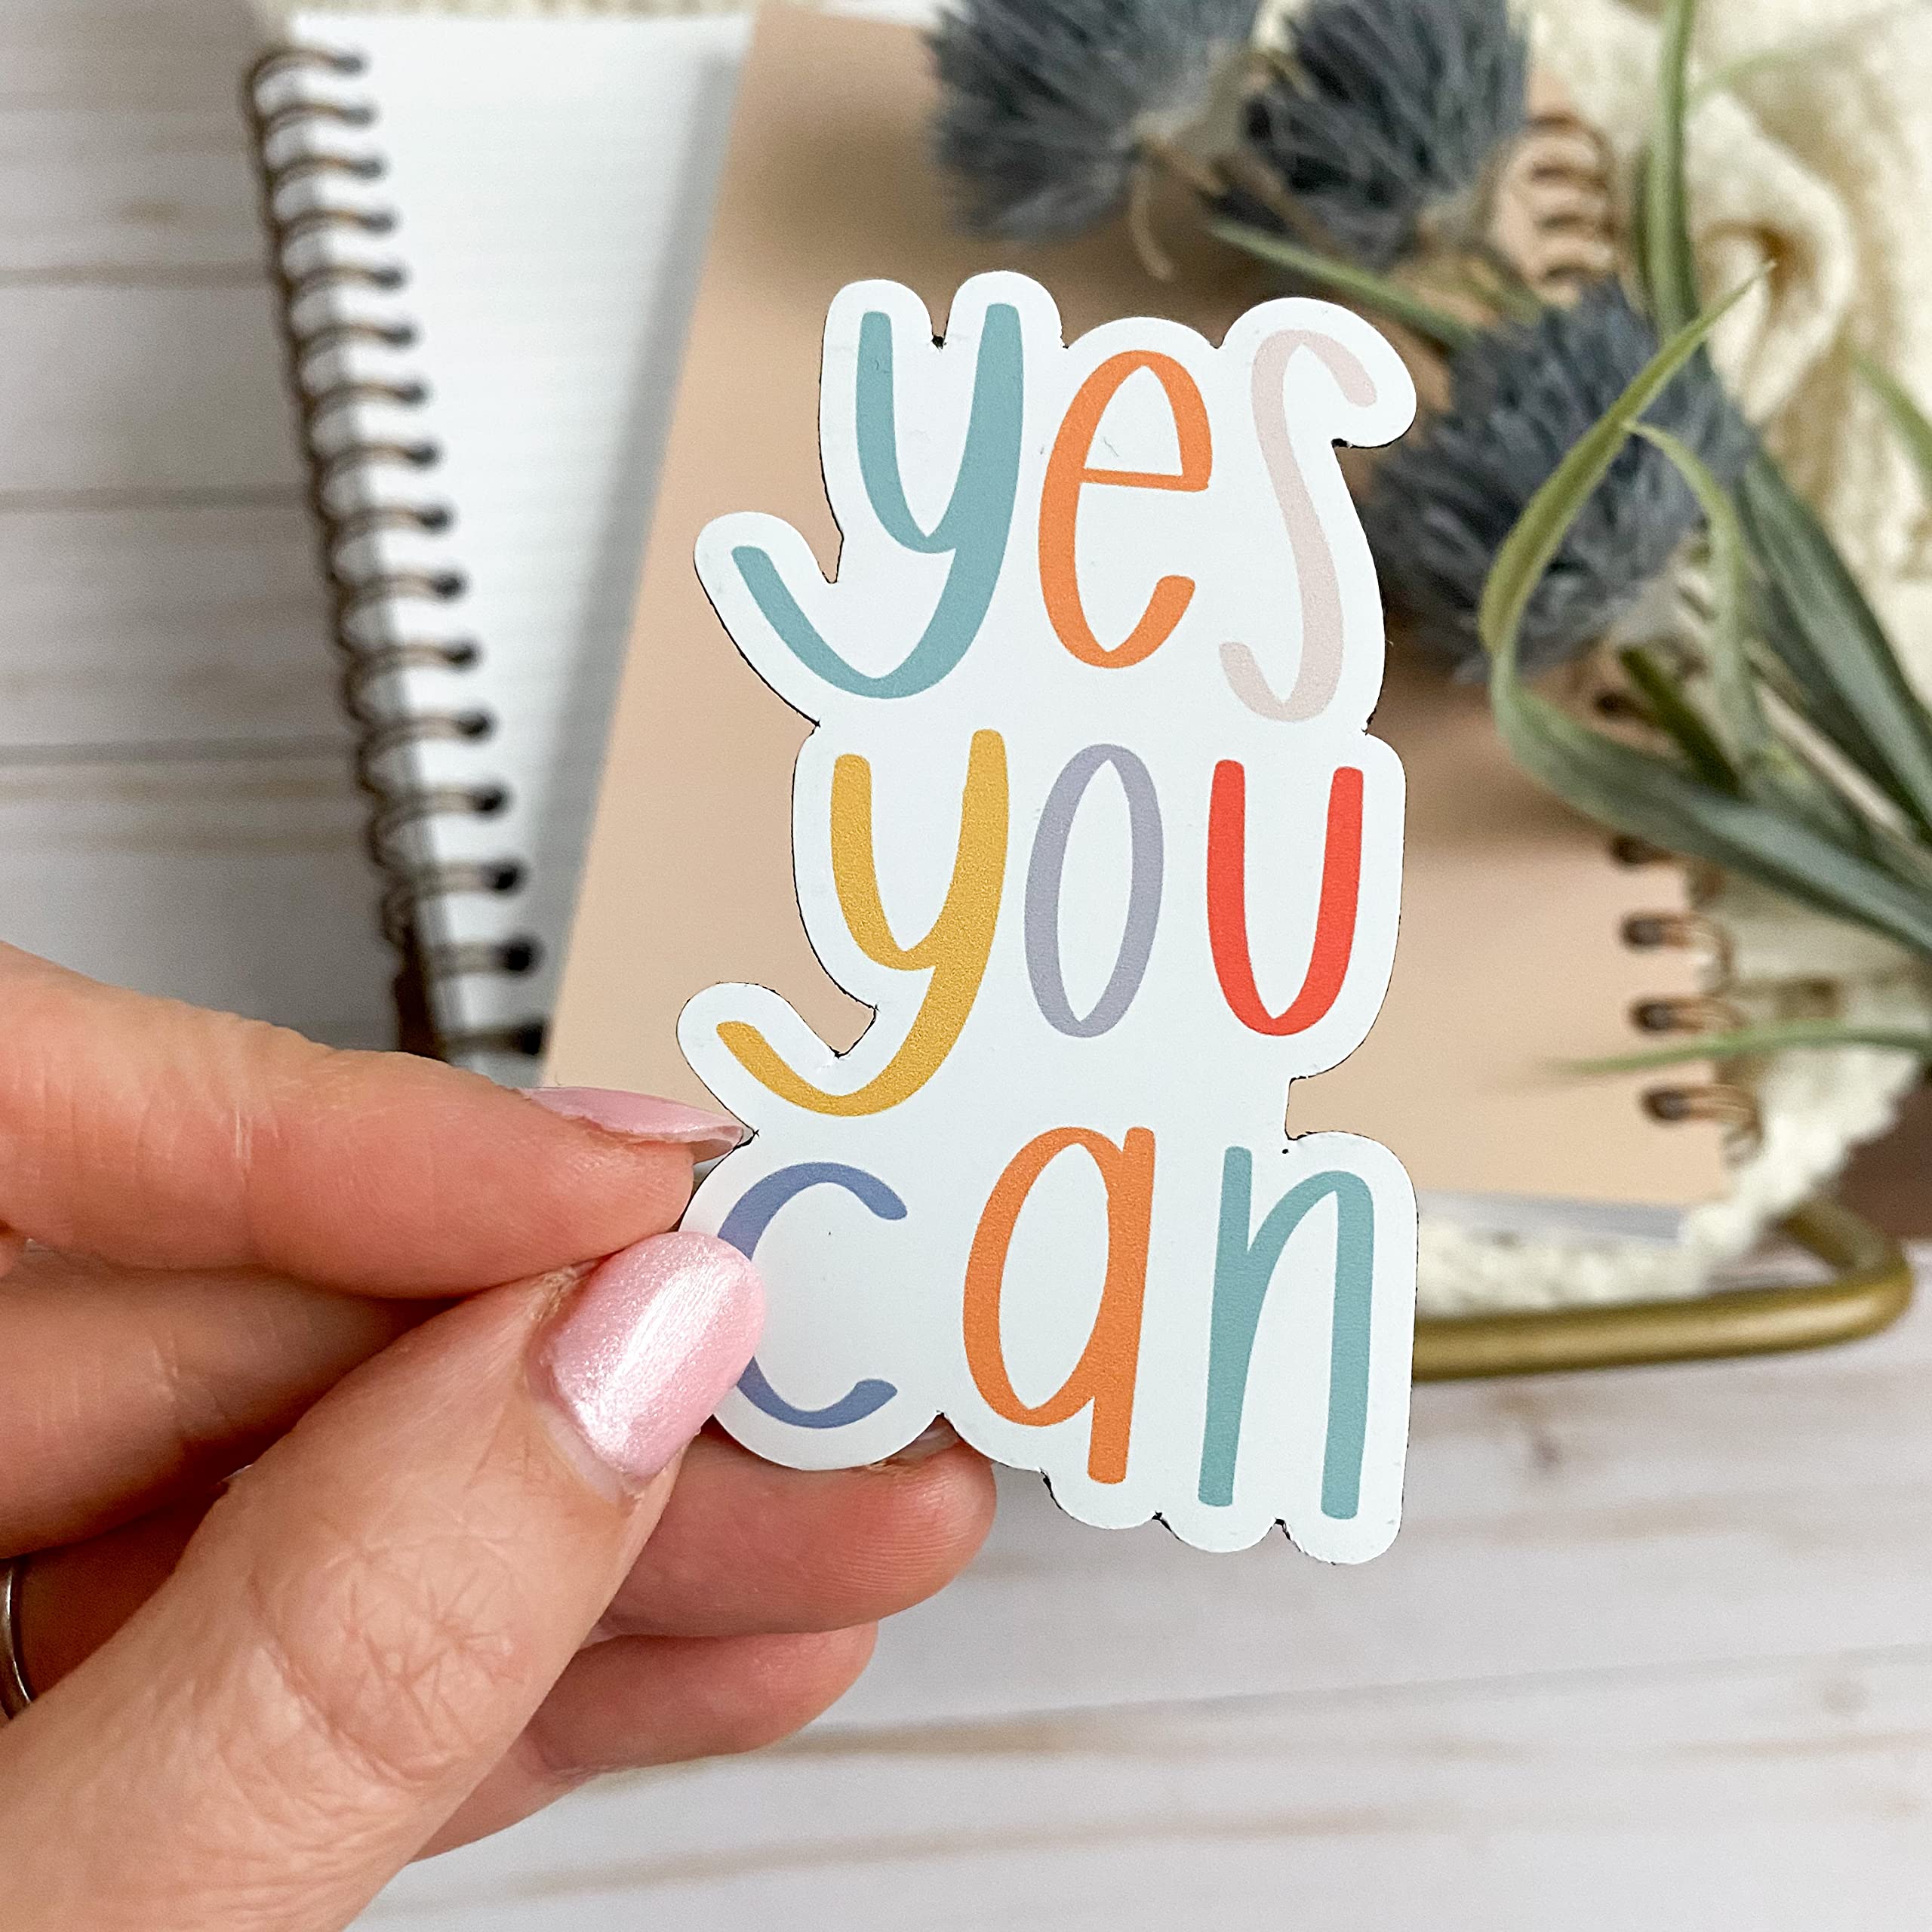 Swaygirls locker magnet | Cute fridge magnets | Yes you can refrigerator magnet | Inspirational quotes